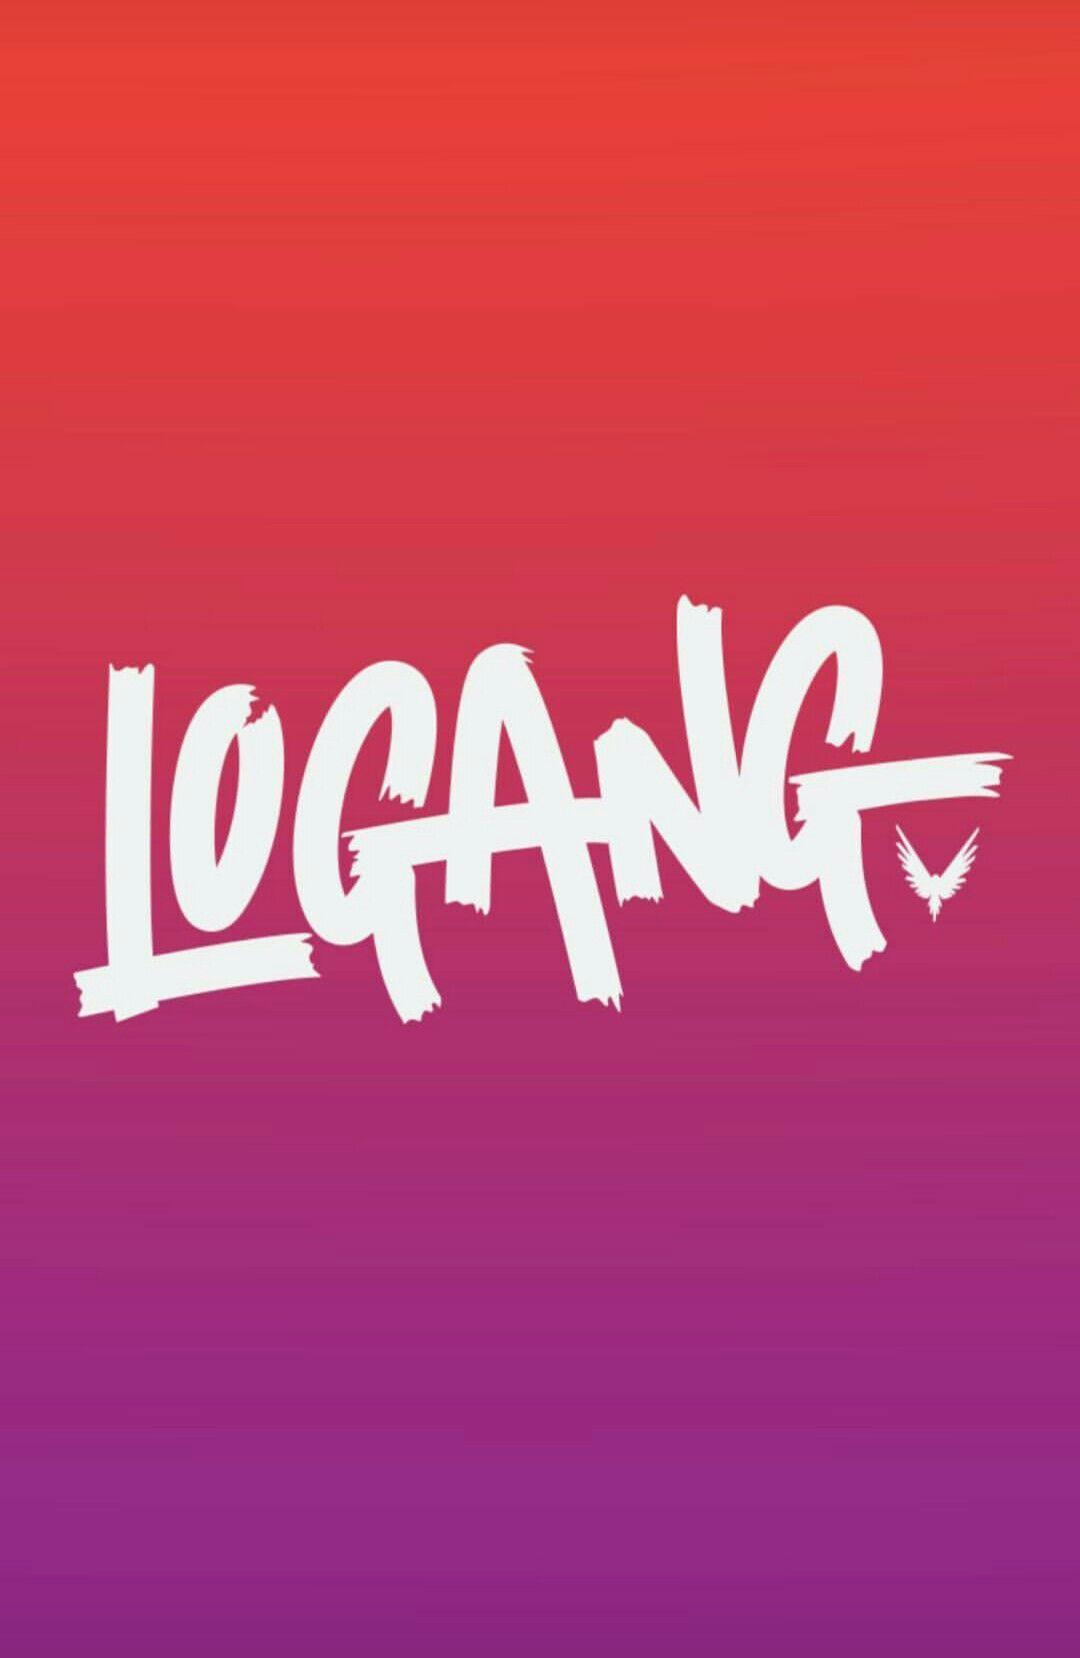 Calling all the logang